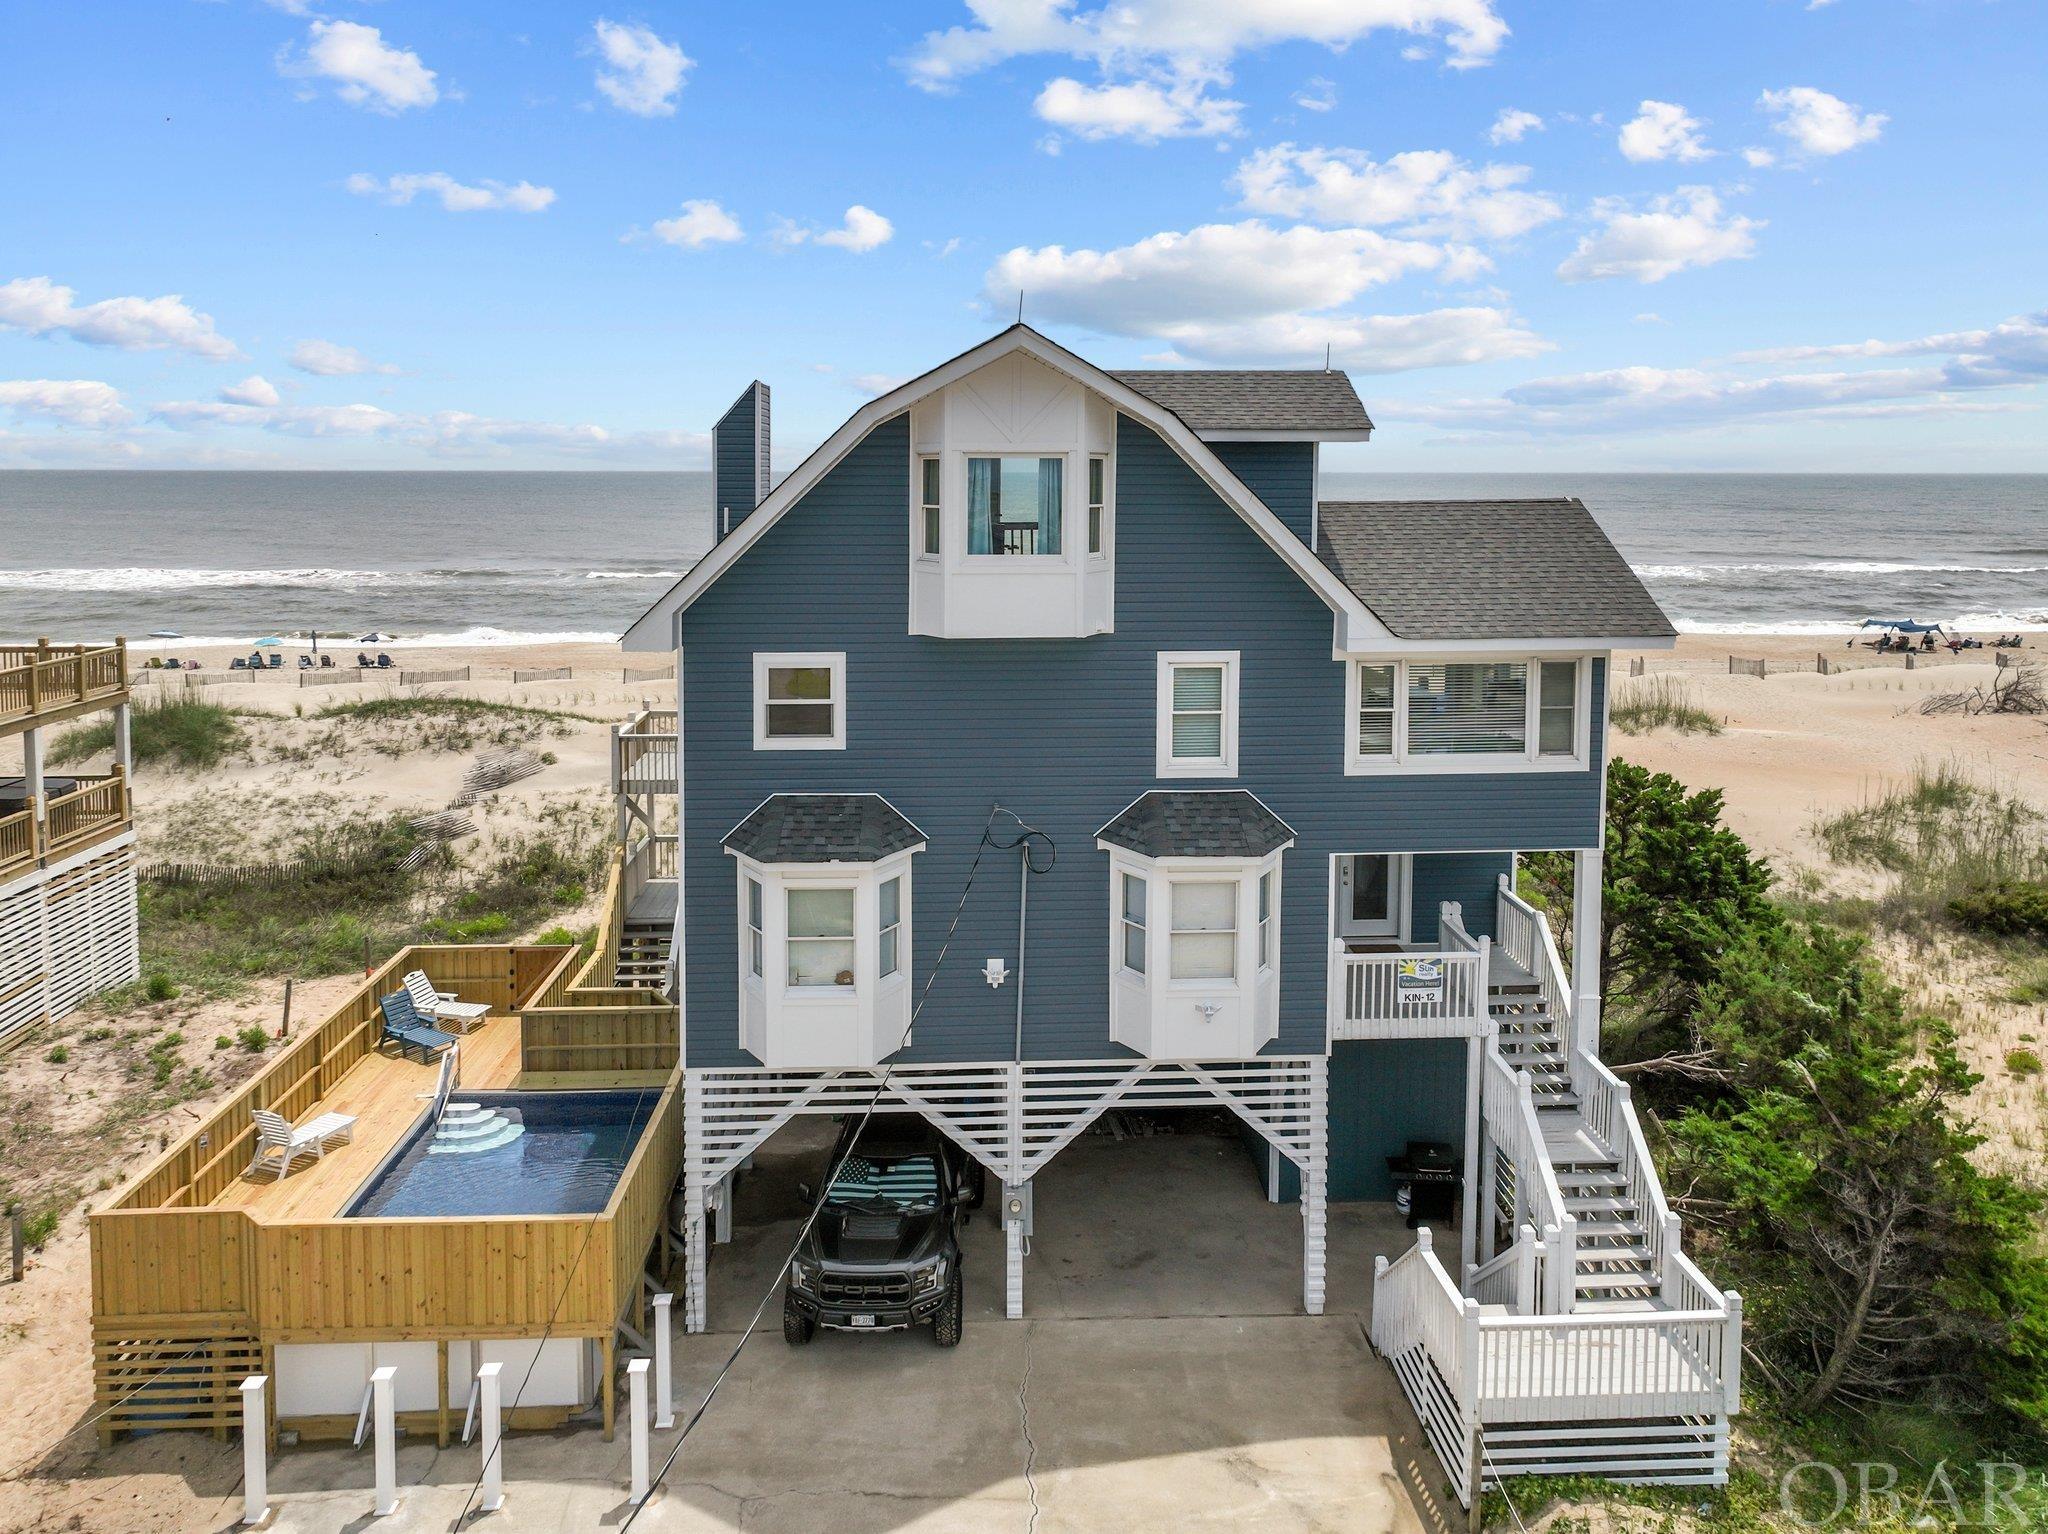 Over $164K YTD for 2024.   $170K for the 2023 rental season.  Over $500k in renovations from top to bottom, with a new private pool, this amazing Oceanfront located centrally on the newly re-nourished beaches of Avon offers incredible panoramic views of both the ocean and even glimpses of the sound.  This makes it one of the few homes where the beauty found outside matches what you experience when walking in.    The beautifully decorated living area with new furnishings and luxury vinyl tile provides plenty of comfortable seating with a large embankment of windows allowing visitors to soak up some of the best views of the Atlantic Ocean while in the comfort of your own home.  The well-equipped kitchen with a breakfast bar, new granite counter tops, stainless steel appliances and 2nd refrigerator provide a setting that can handle light hors d'oeuvres or family-size meals in style   Along with a large dining room table, the home provides an alternative sitting area/den. Sliding doors to the oceanfront deck and large picture windows provide even more stunning ocean views and natural light. Dine al fresco while enjoying the sea breezes at the picnic table on the deck.  The extensive updates continue as one visits the more private areas of the house.  More luxury vinyl tile, new bedroom furnishings, paint and custom tile showers makes it clear, no expense was spared in the renovation.  The mid-level offers a king bedroom, 2 queen bedrooms, and a bedroom with 3 twin beds along with the two aforementioned renovated bathrooms.  Upstairs a captains cove loft with full bath and more impressive views from the highest vantage point of the house.  Outside, both sun and covered decks are accessible from most bedrooms and living areas, all with more of those stunning views.  The mid-level shaded deck even features a brand new hot tub.    On the lowest level, you will find the newest update, a custom 12x21 foot pool.  Come and see for yourself, a top of the line oceanfront, in an X flood zone brimming with rental potential for 2023 and beyond.   In fact, with $185K on the books for 2023, all while not being rented for spring due to renovations, Sun Realty is projecting almost $200K with a full open calendar.  Taking a huge step forward, the home currently has $176K in prebookings for 2024 setting the stage for a monster year next season.   See below for over $500K worth of updates to the property.  • New Roof • New siding • New exterior window trims • New facia boards  • New Windows, trims and exterior doors • New framing and walls on the ocean side • New top level deck • New hot tub • New heated swimming pool with a privacy fence • Window treatments • Landscaping  • New Paint • New contemporary light fixtures/Ceiling fans with remote control • New large screen Roku TVs on each room • New furniture throughout • New decor